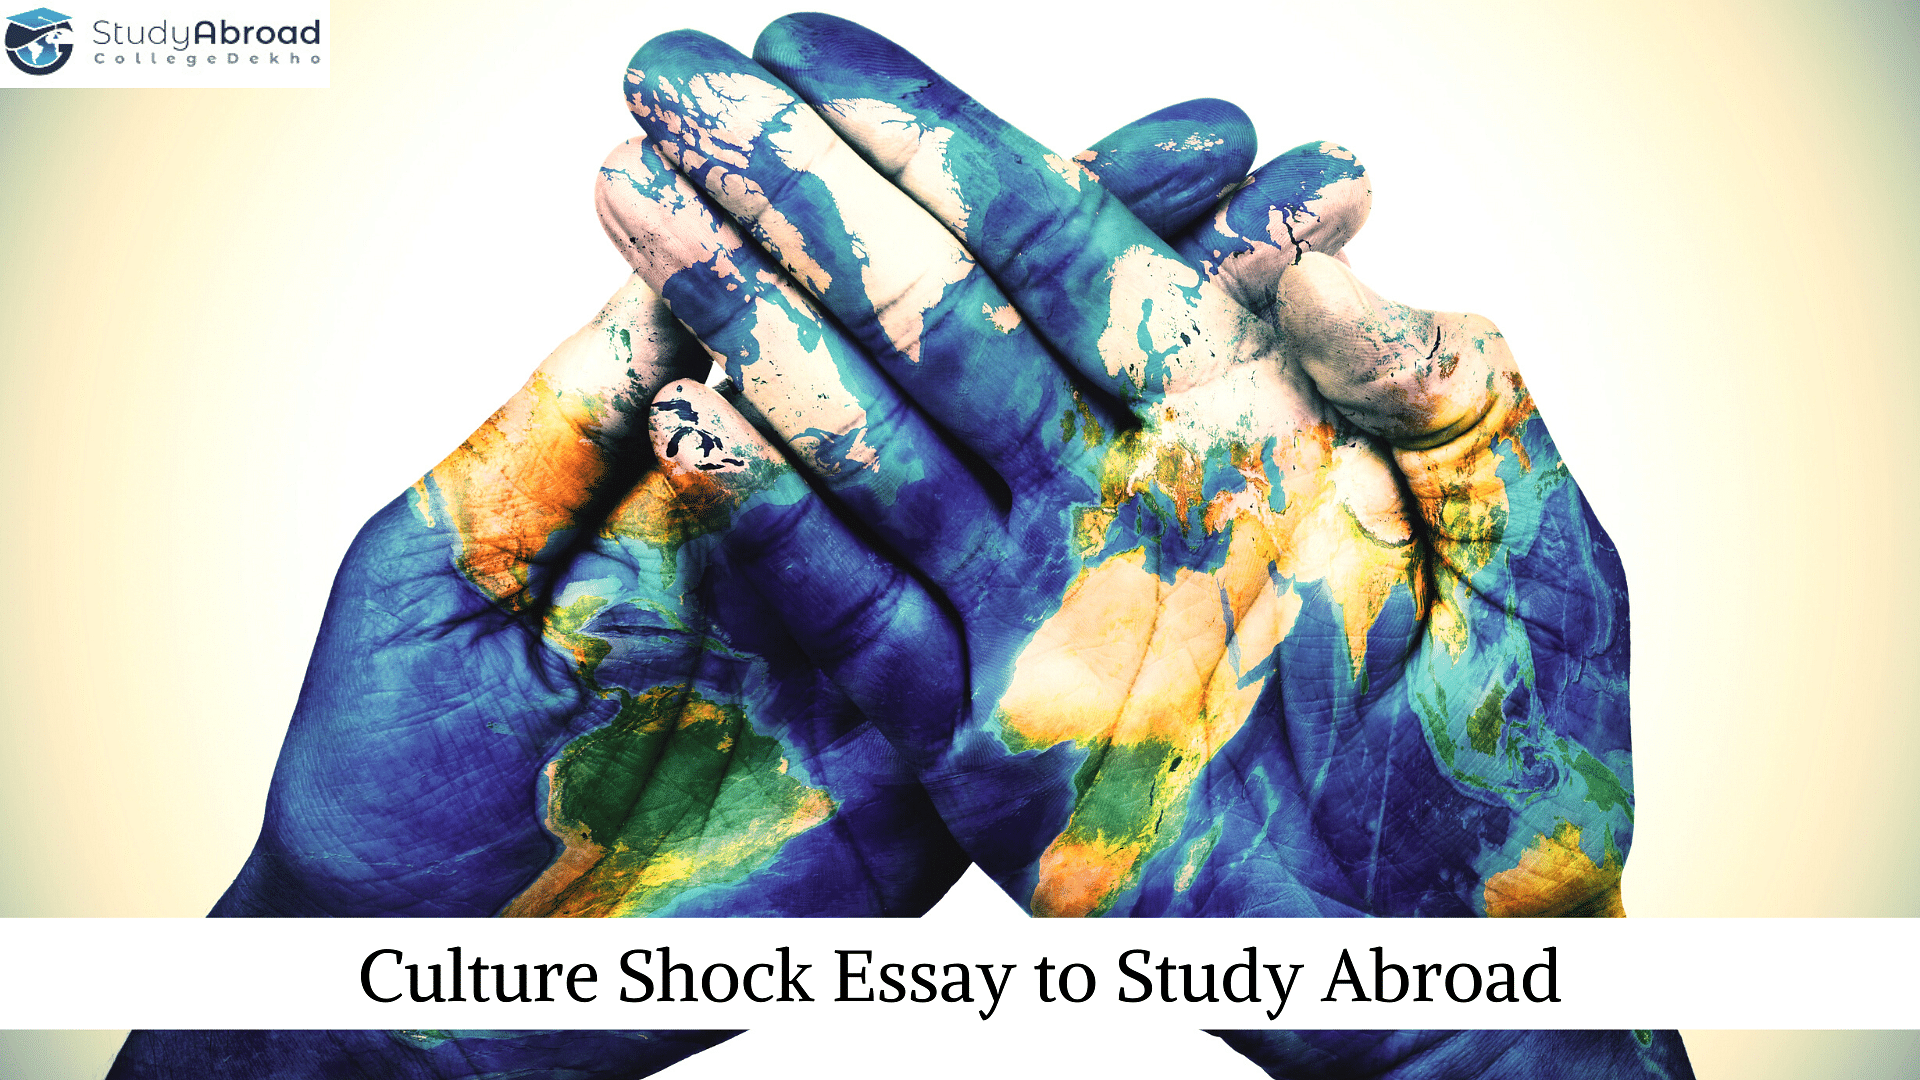 Culture Shock Essay to Study Abroad